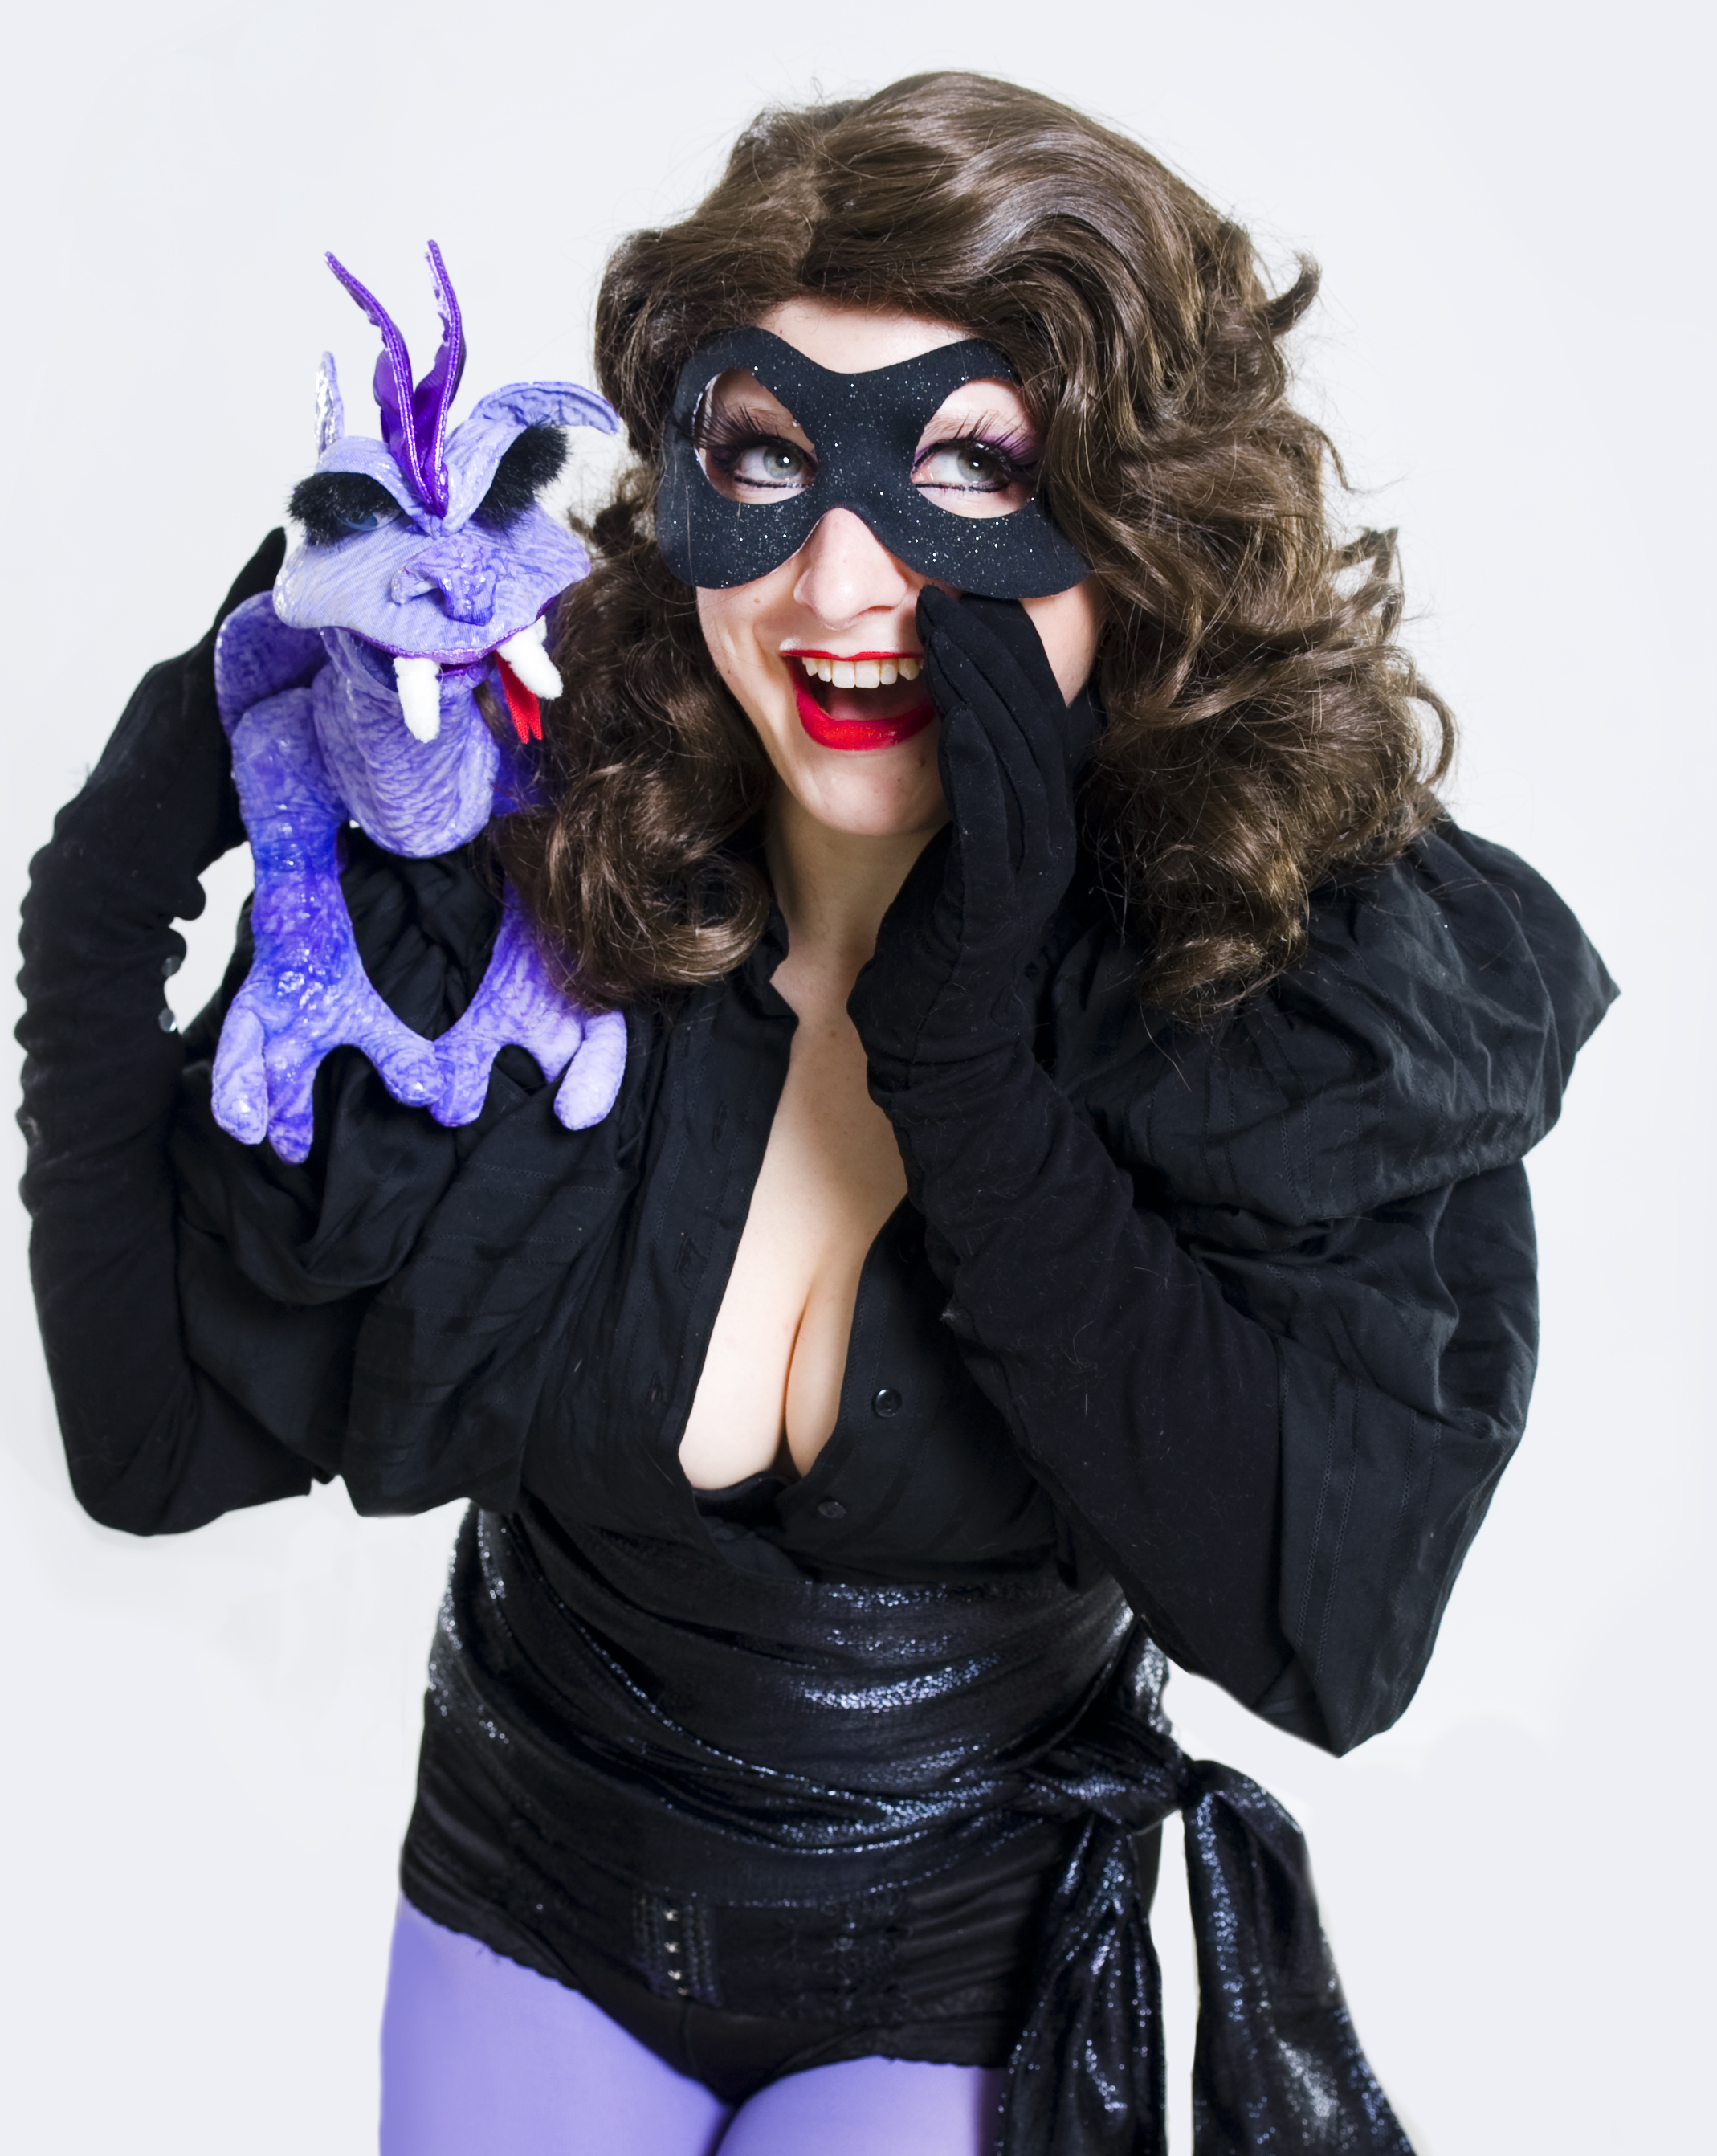 Lefty Lucy as Kitty Pryde